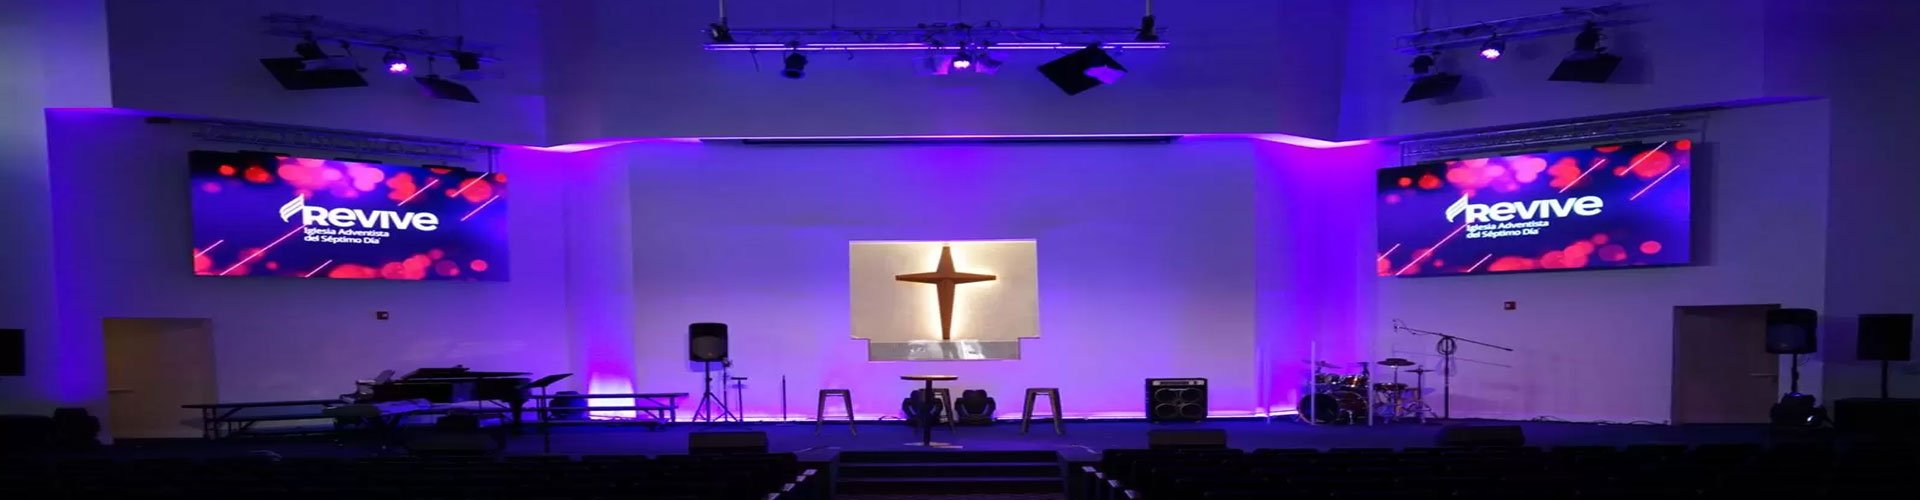 LED Video Walls For Churches